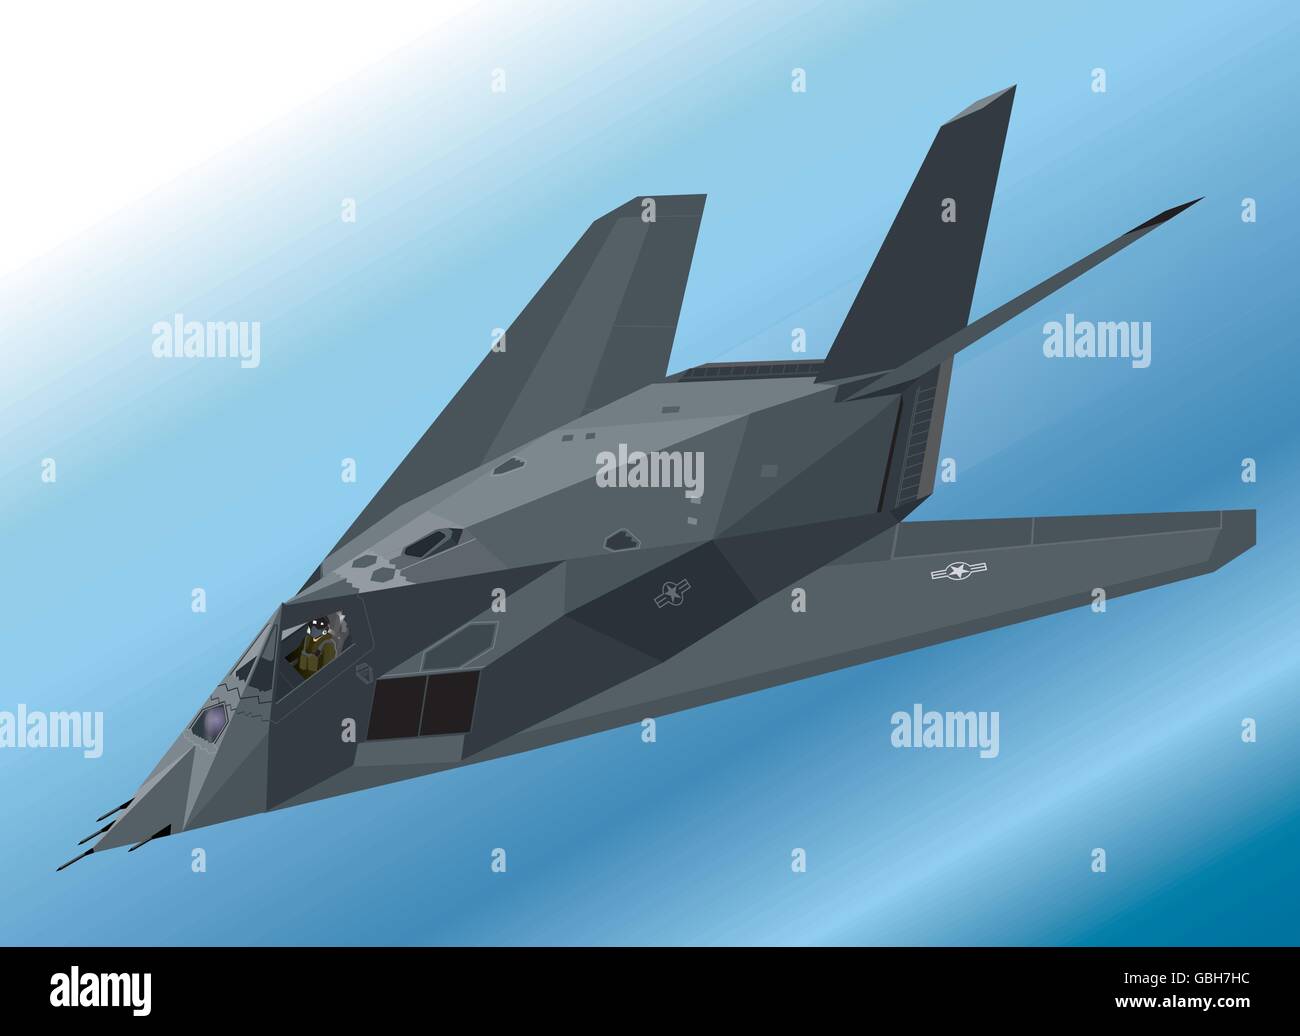 Detailed Isometric Illustration of an F-117 Nighthawk Stealth Fighter Airborne Stock Vector